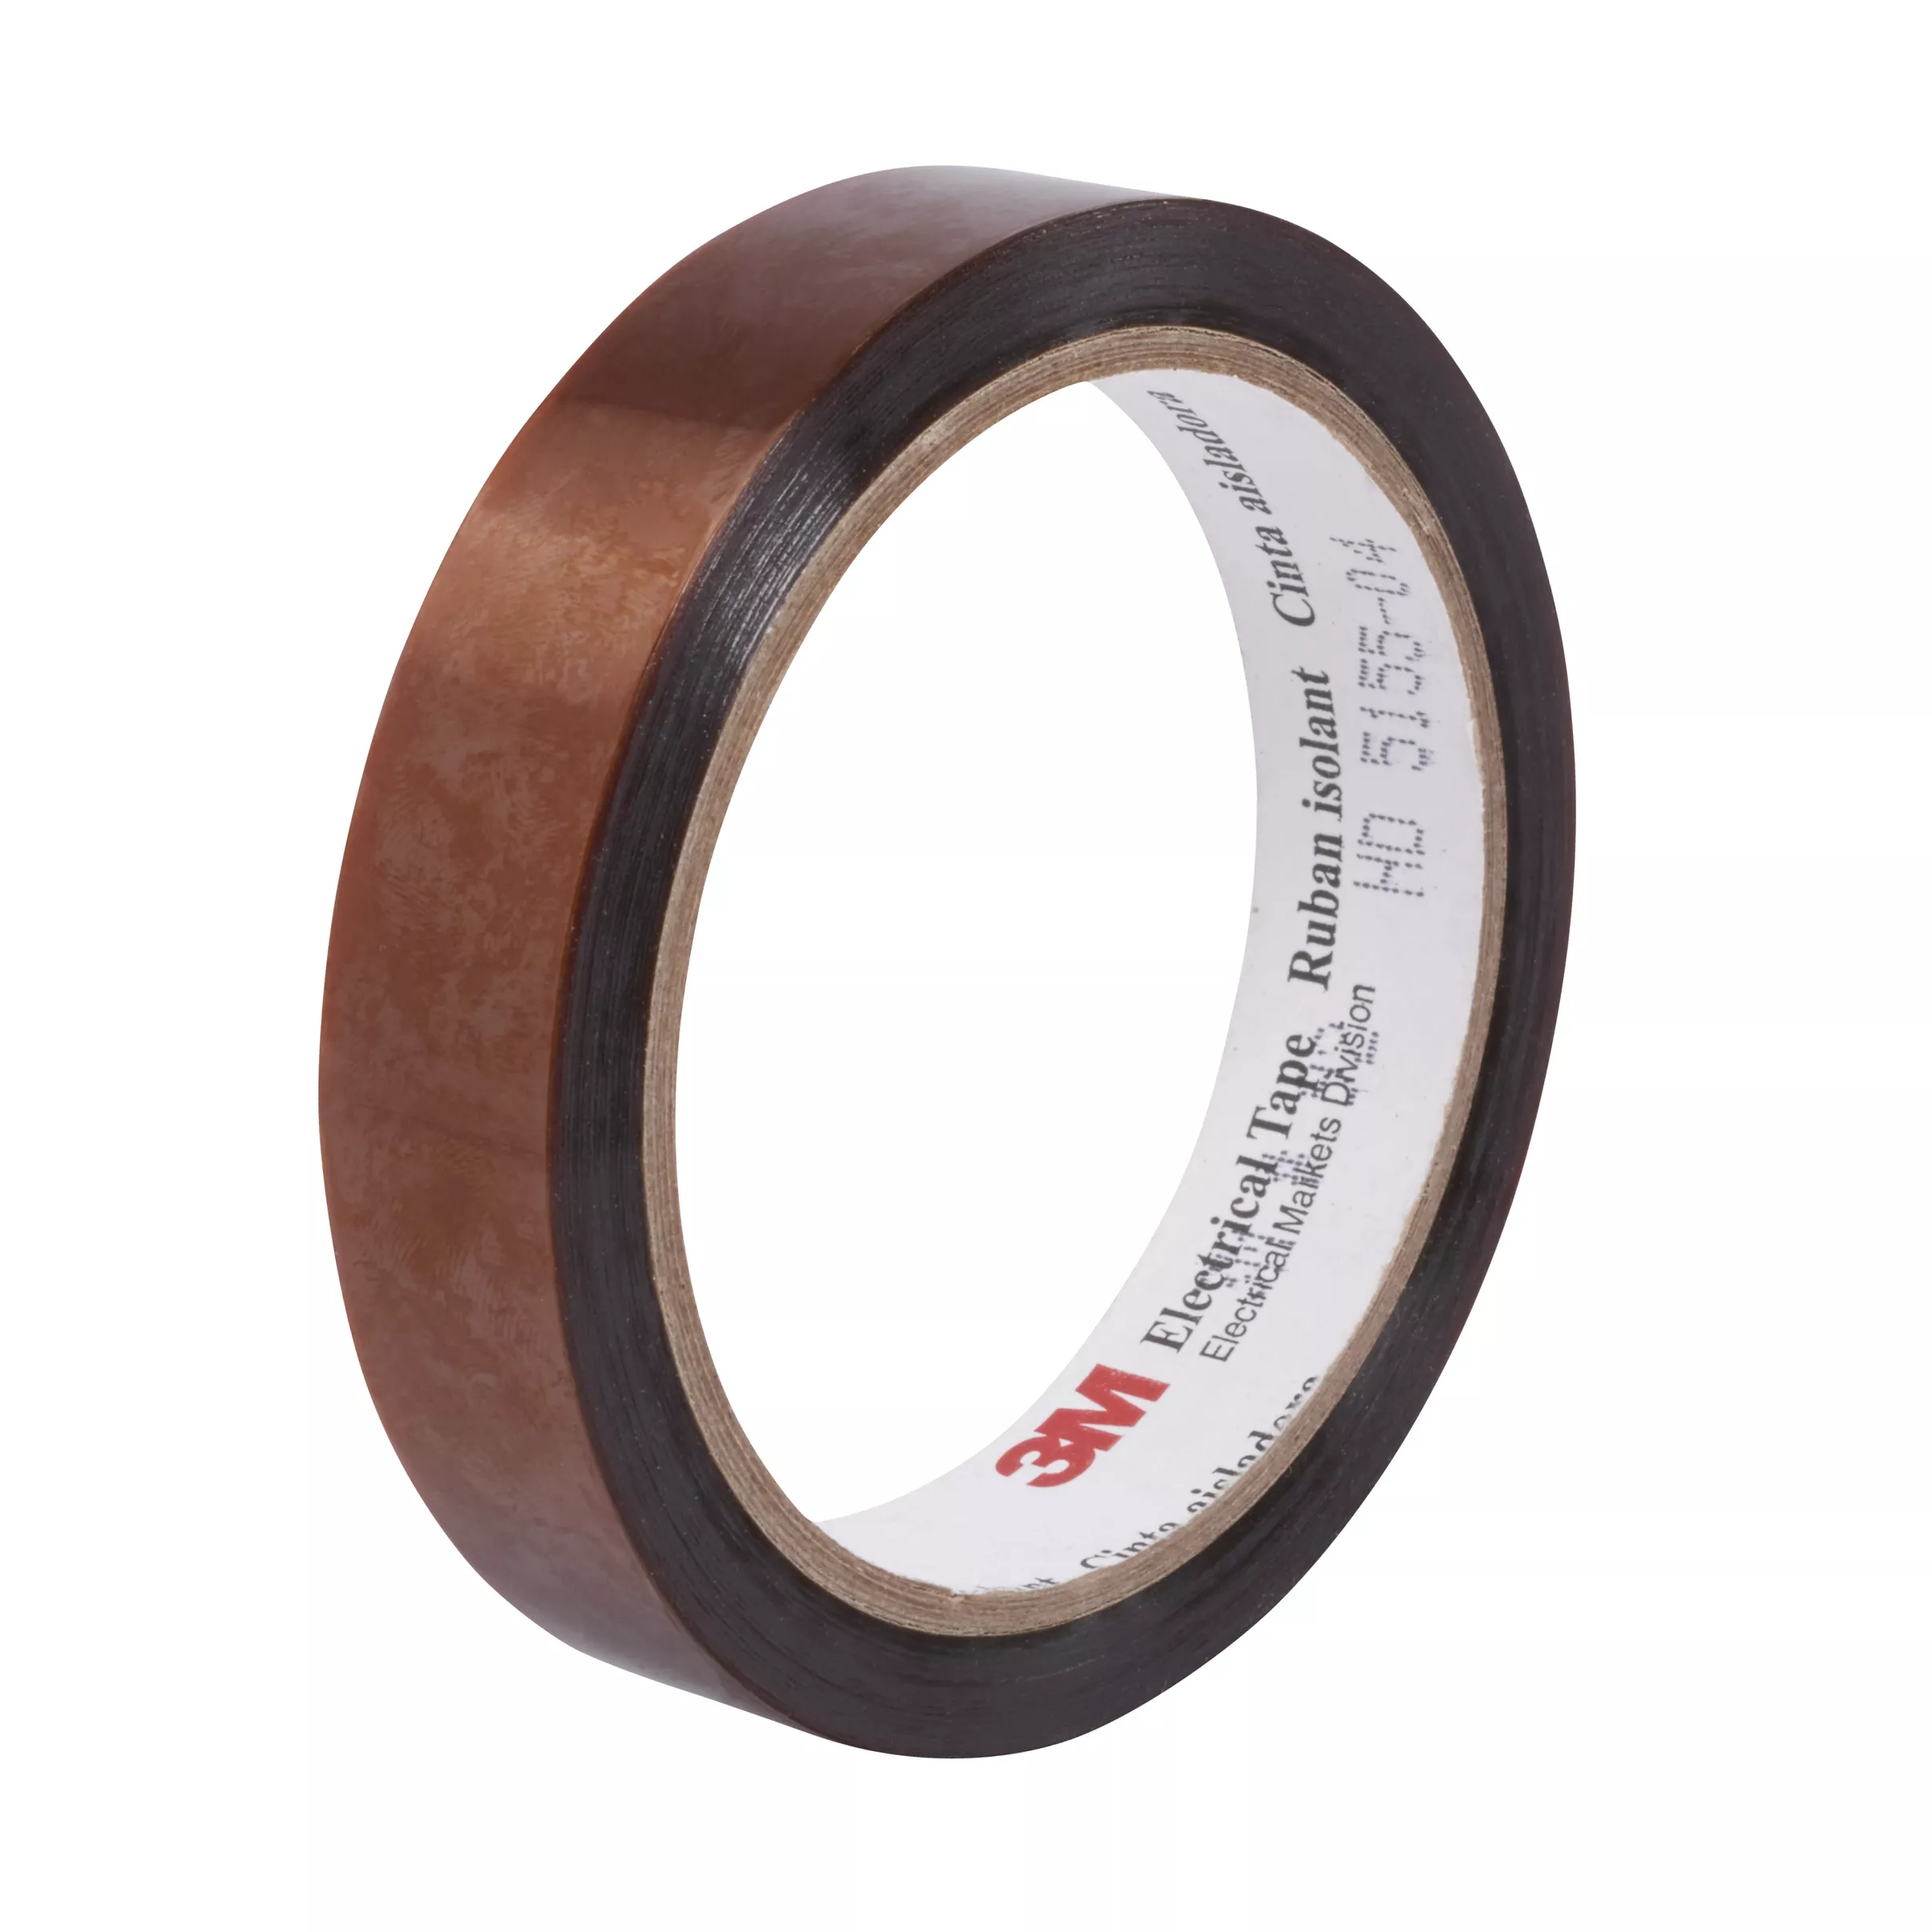 SKU 7000132701 | 3M™ Polyimide Film Electrical Tape 92